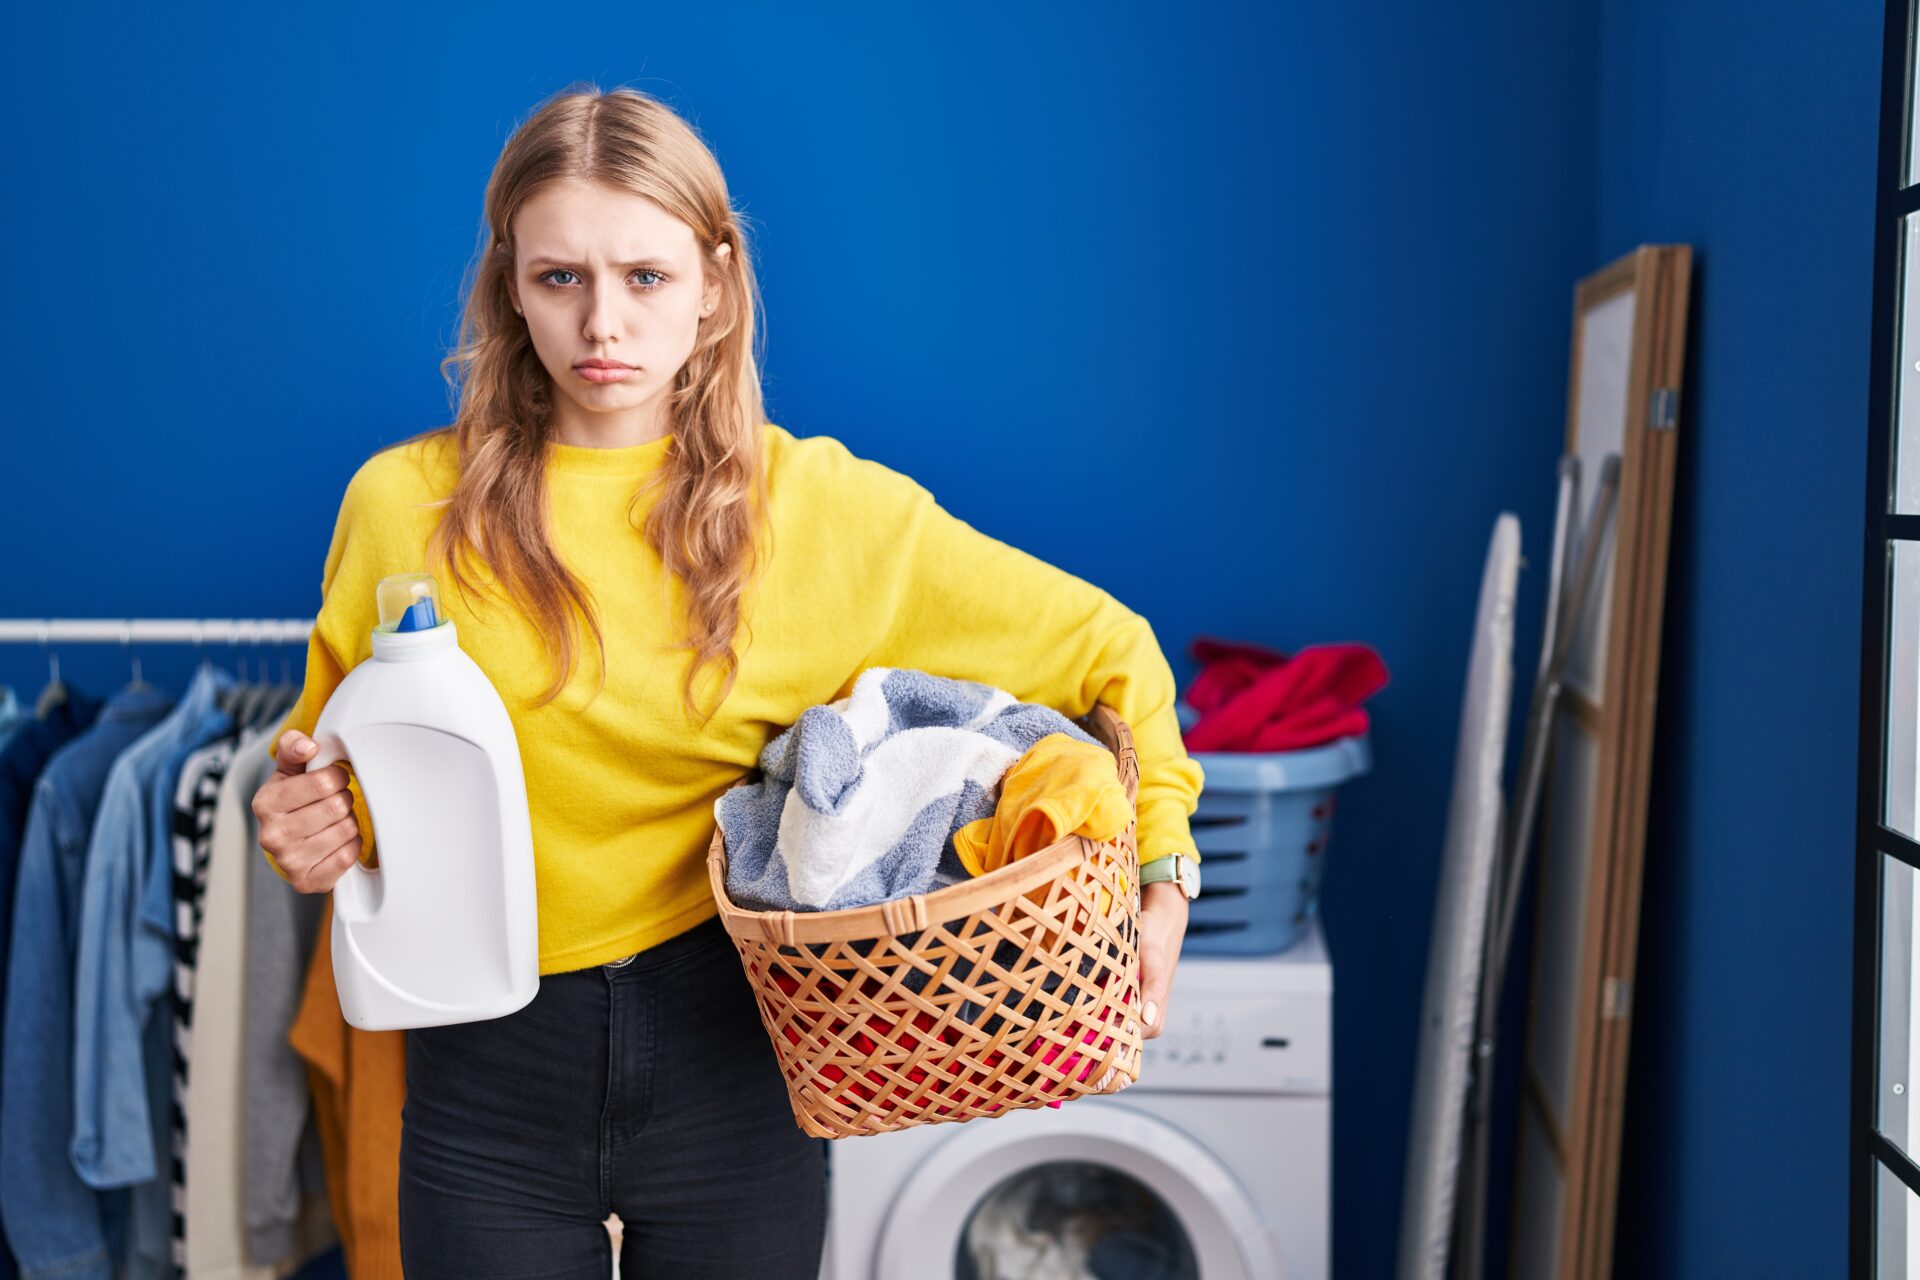 Young caucasian woman holding laundry basket and detergent bottle depressed and worry for distress, crying angry and afraid because her laundry detergent sheets may contain PFAS "forever chemicals". 